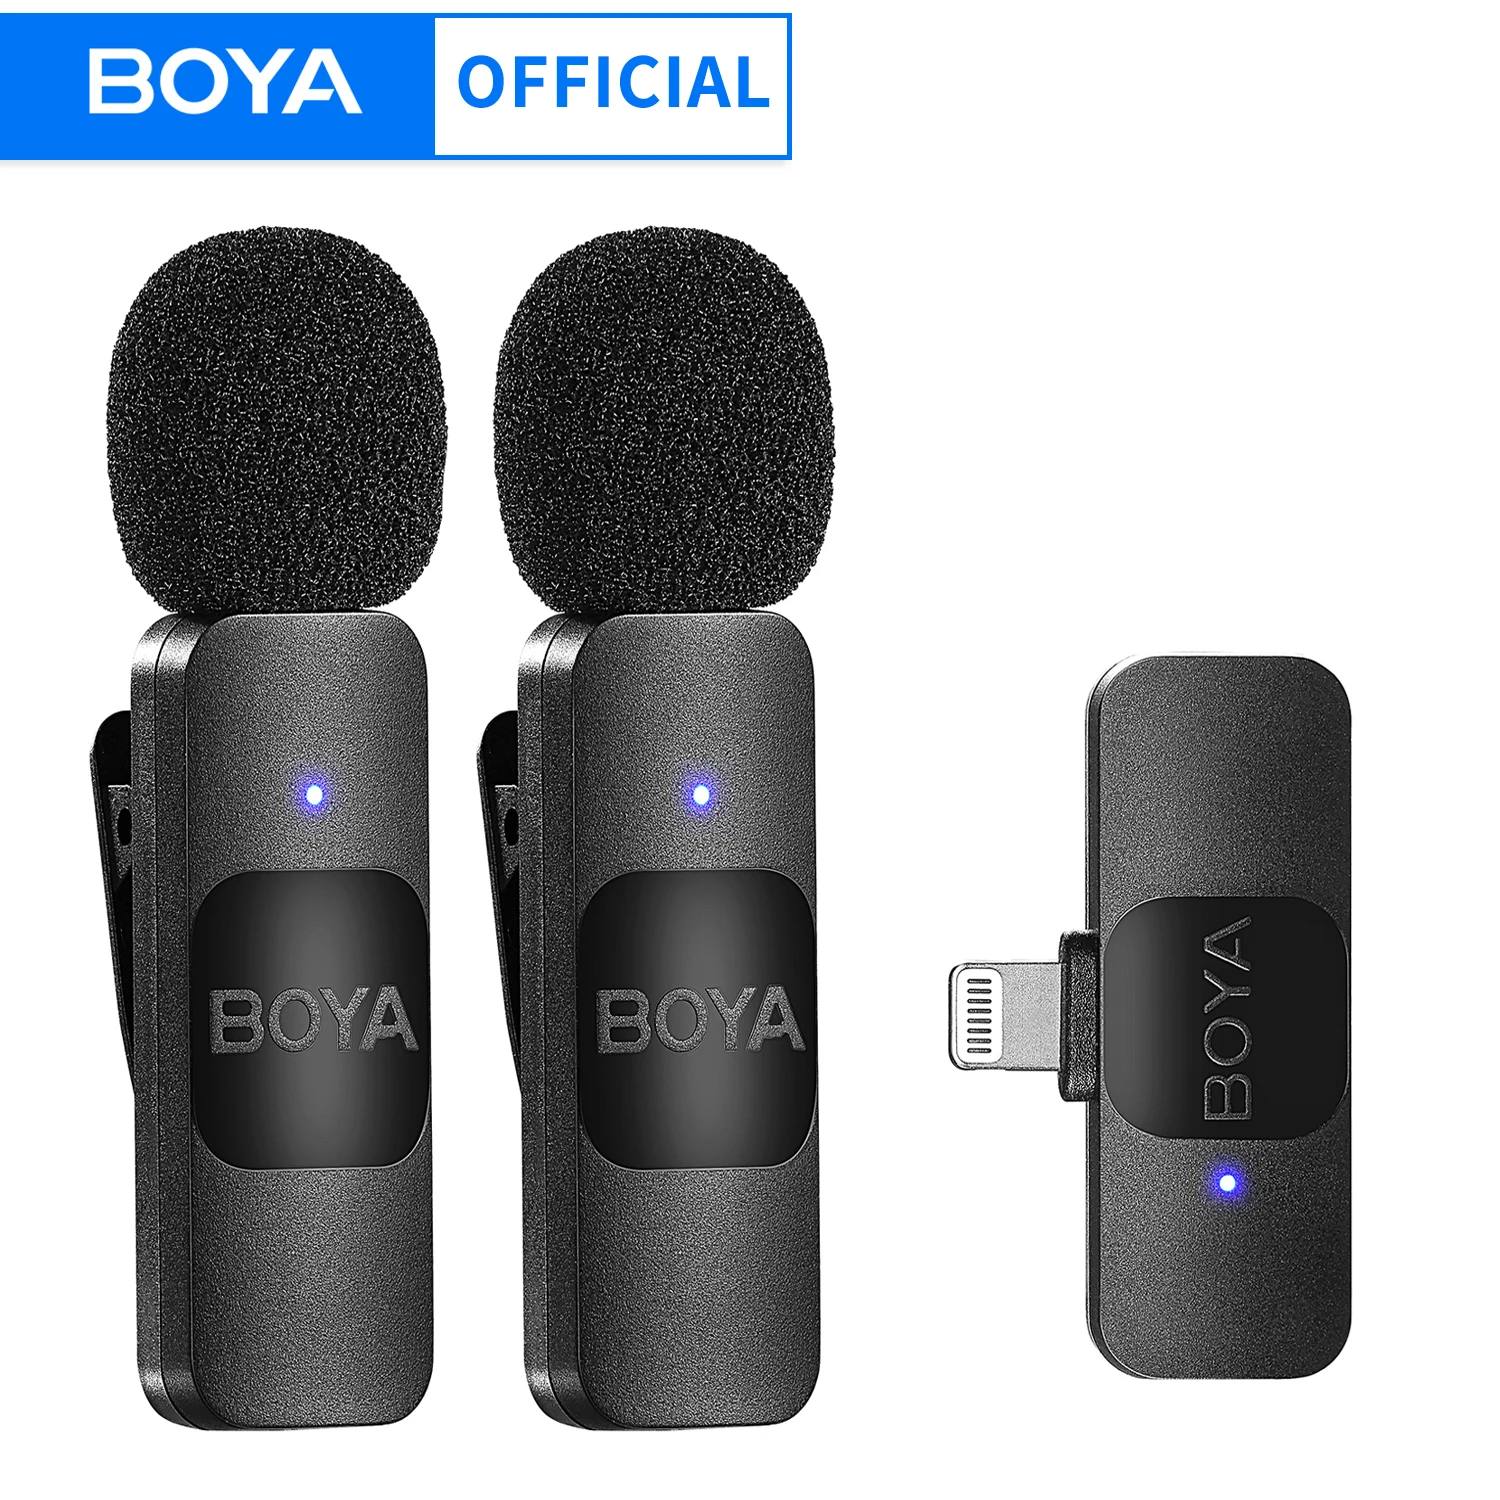 BOYA BY-V Professional Wireless Lavalier Mini Microphone for iPhone iPad Android Live Broadcast Gaming Recording Interview Vlog 1